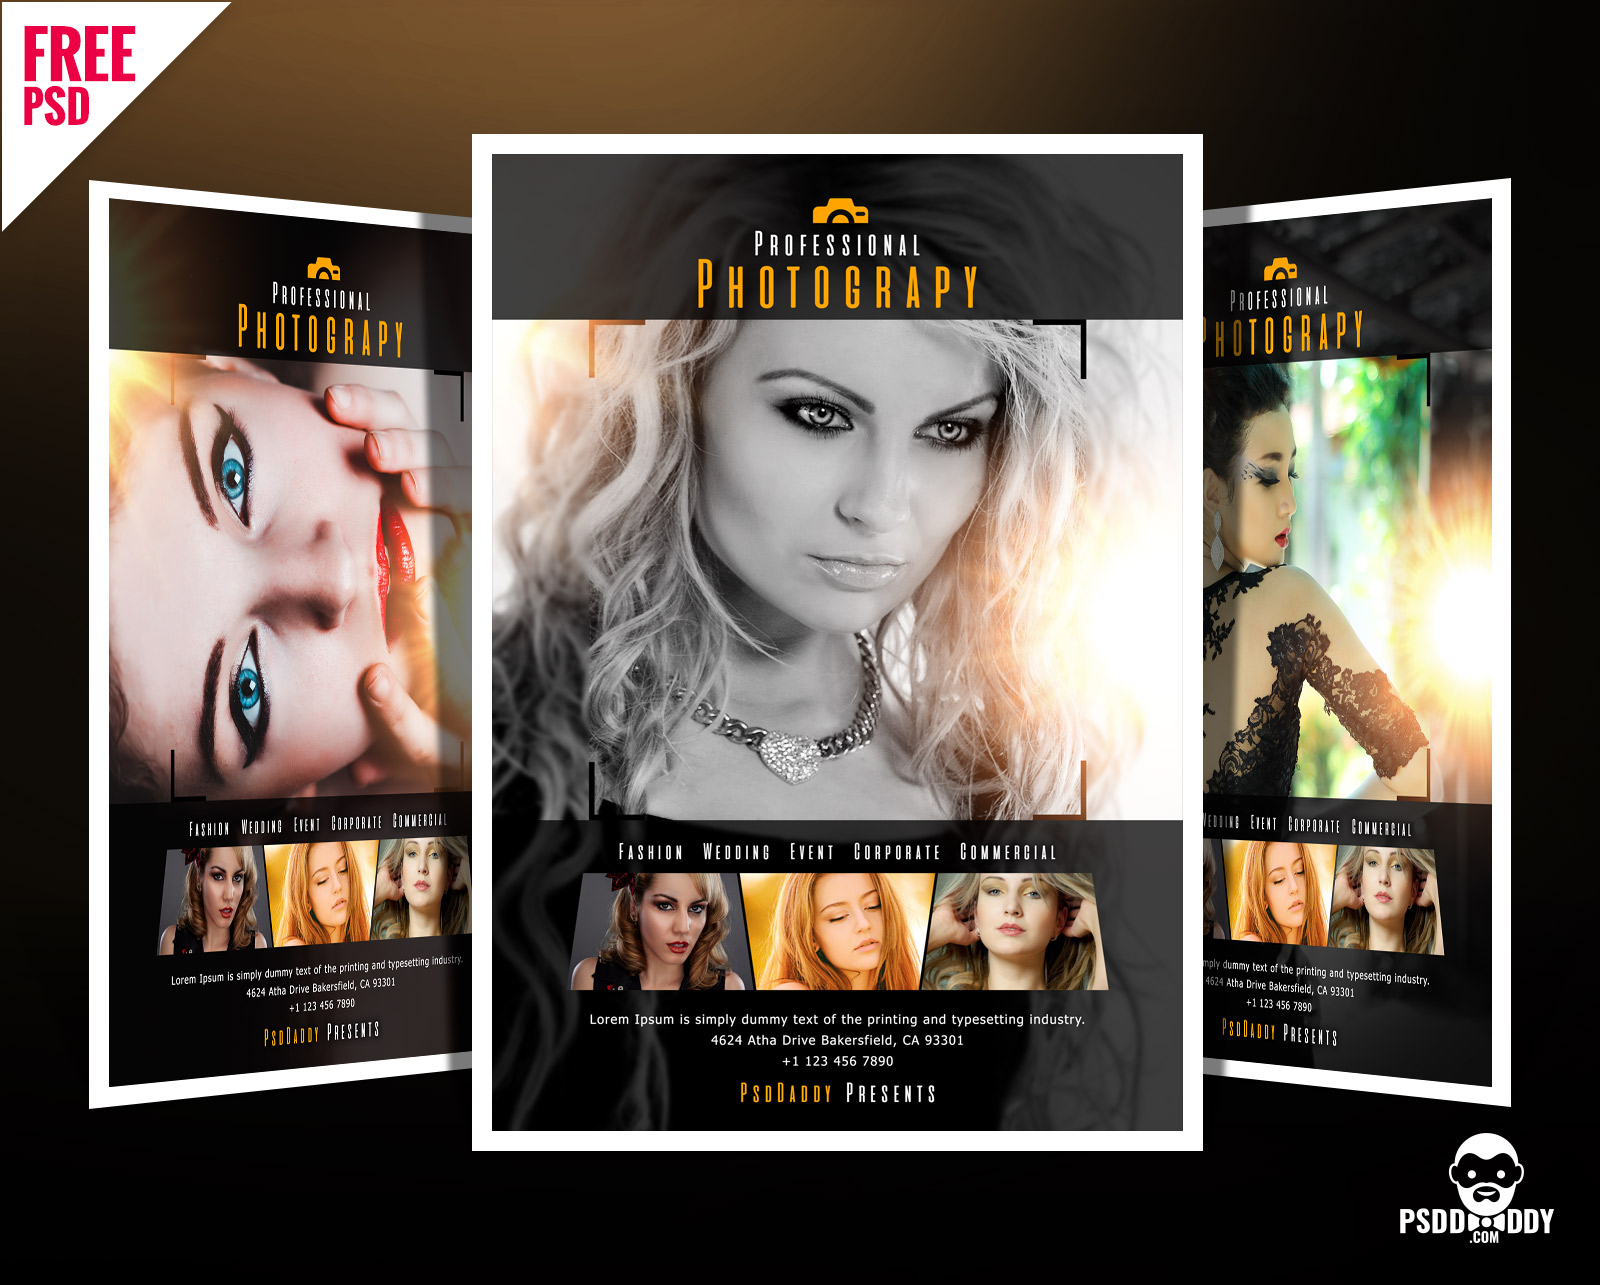 Download Professional Photography Flyer Psd Psddaddy Com